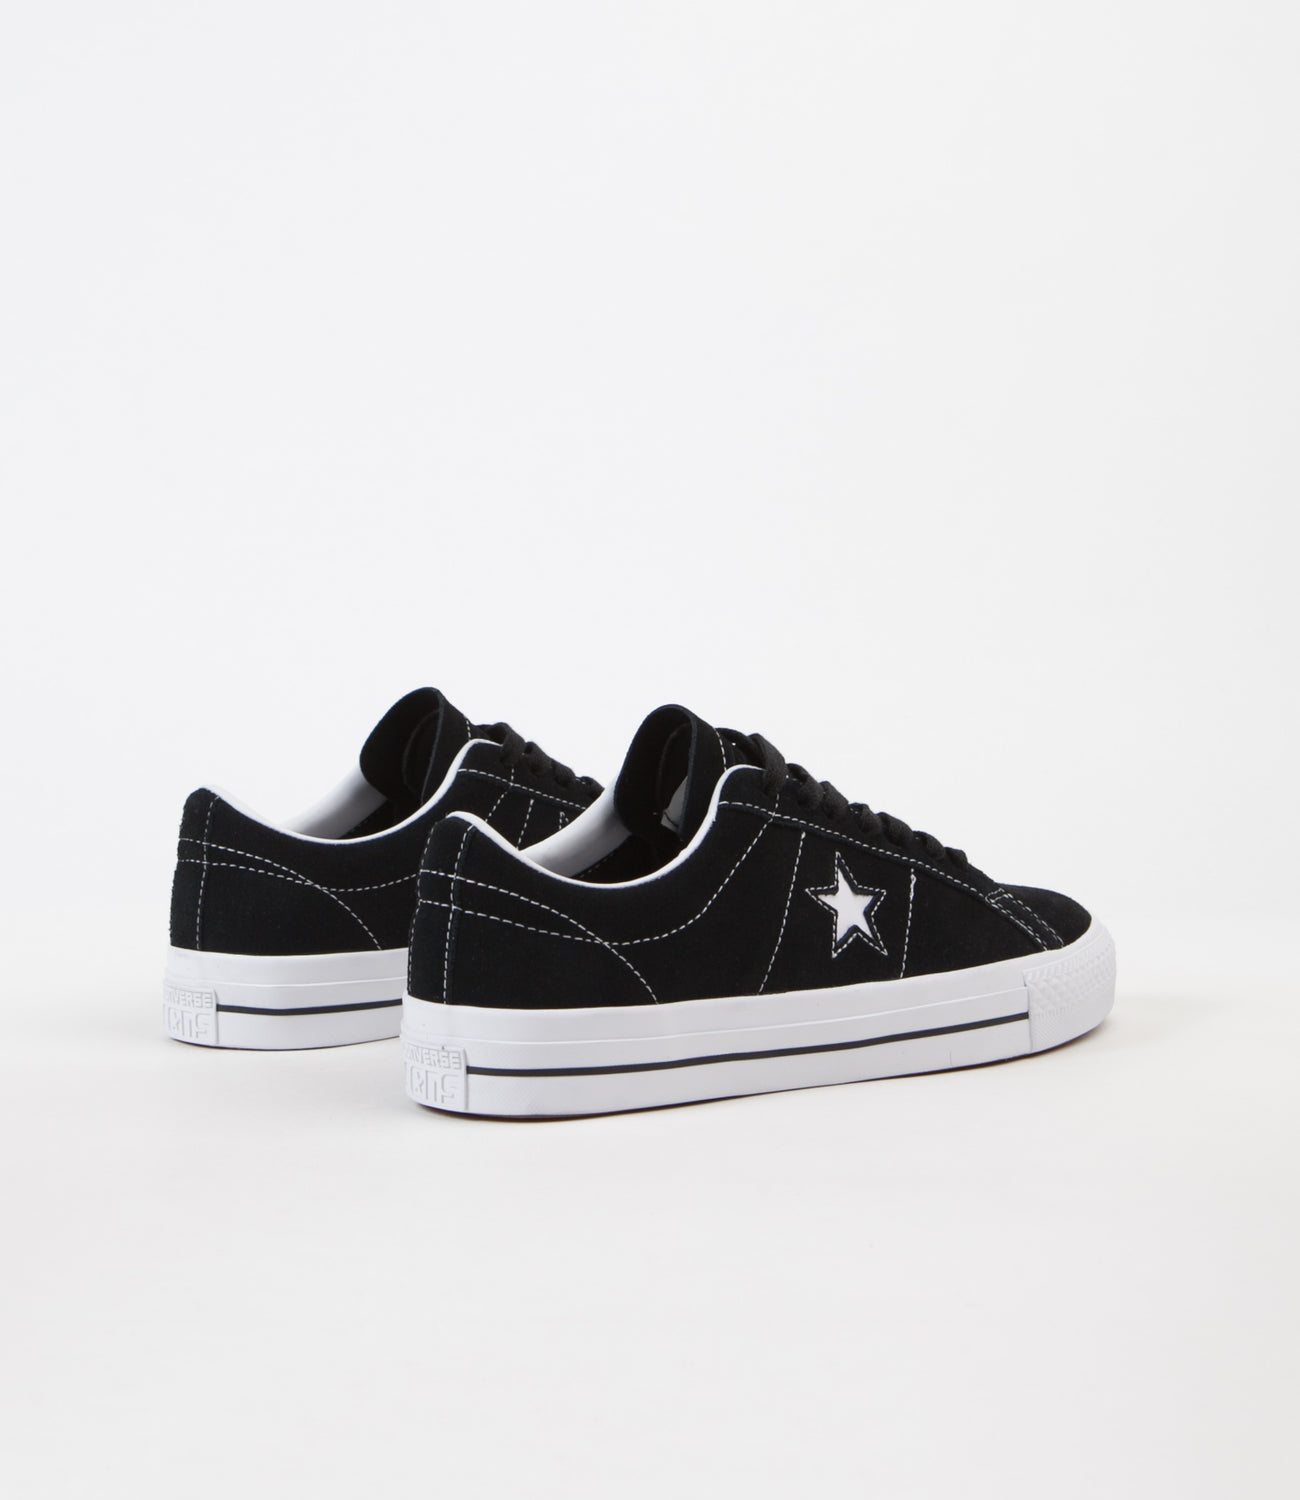 Converse One Star Pro Ox Shoes - Black 